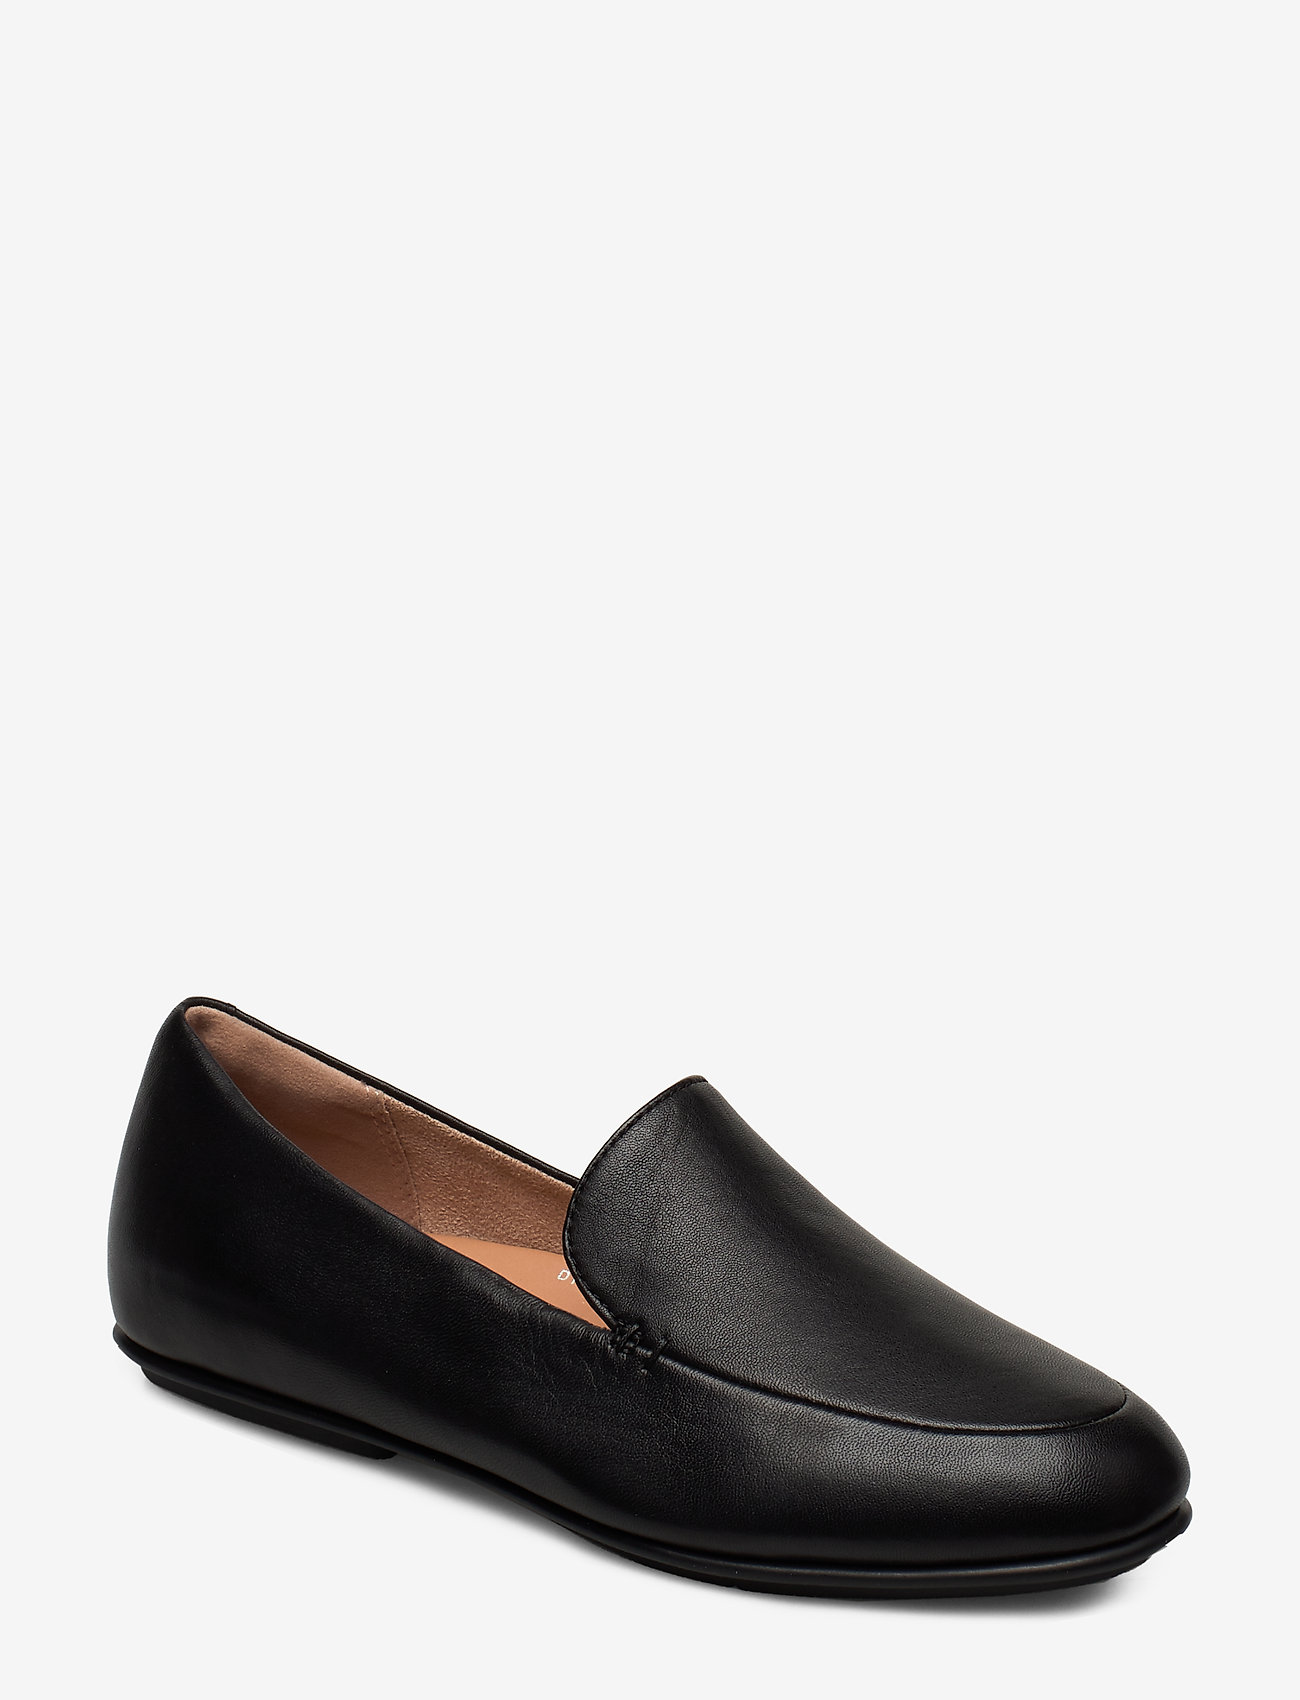 fitflop black loafers